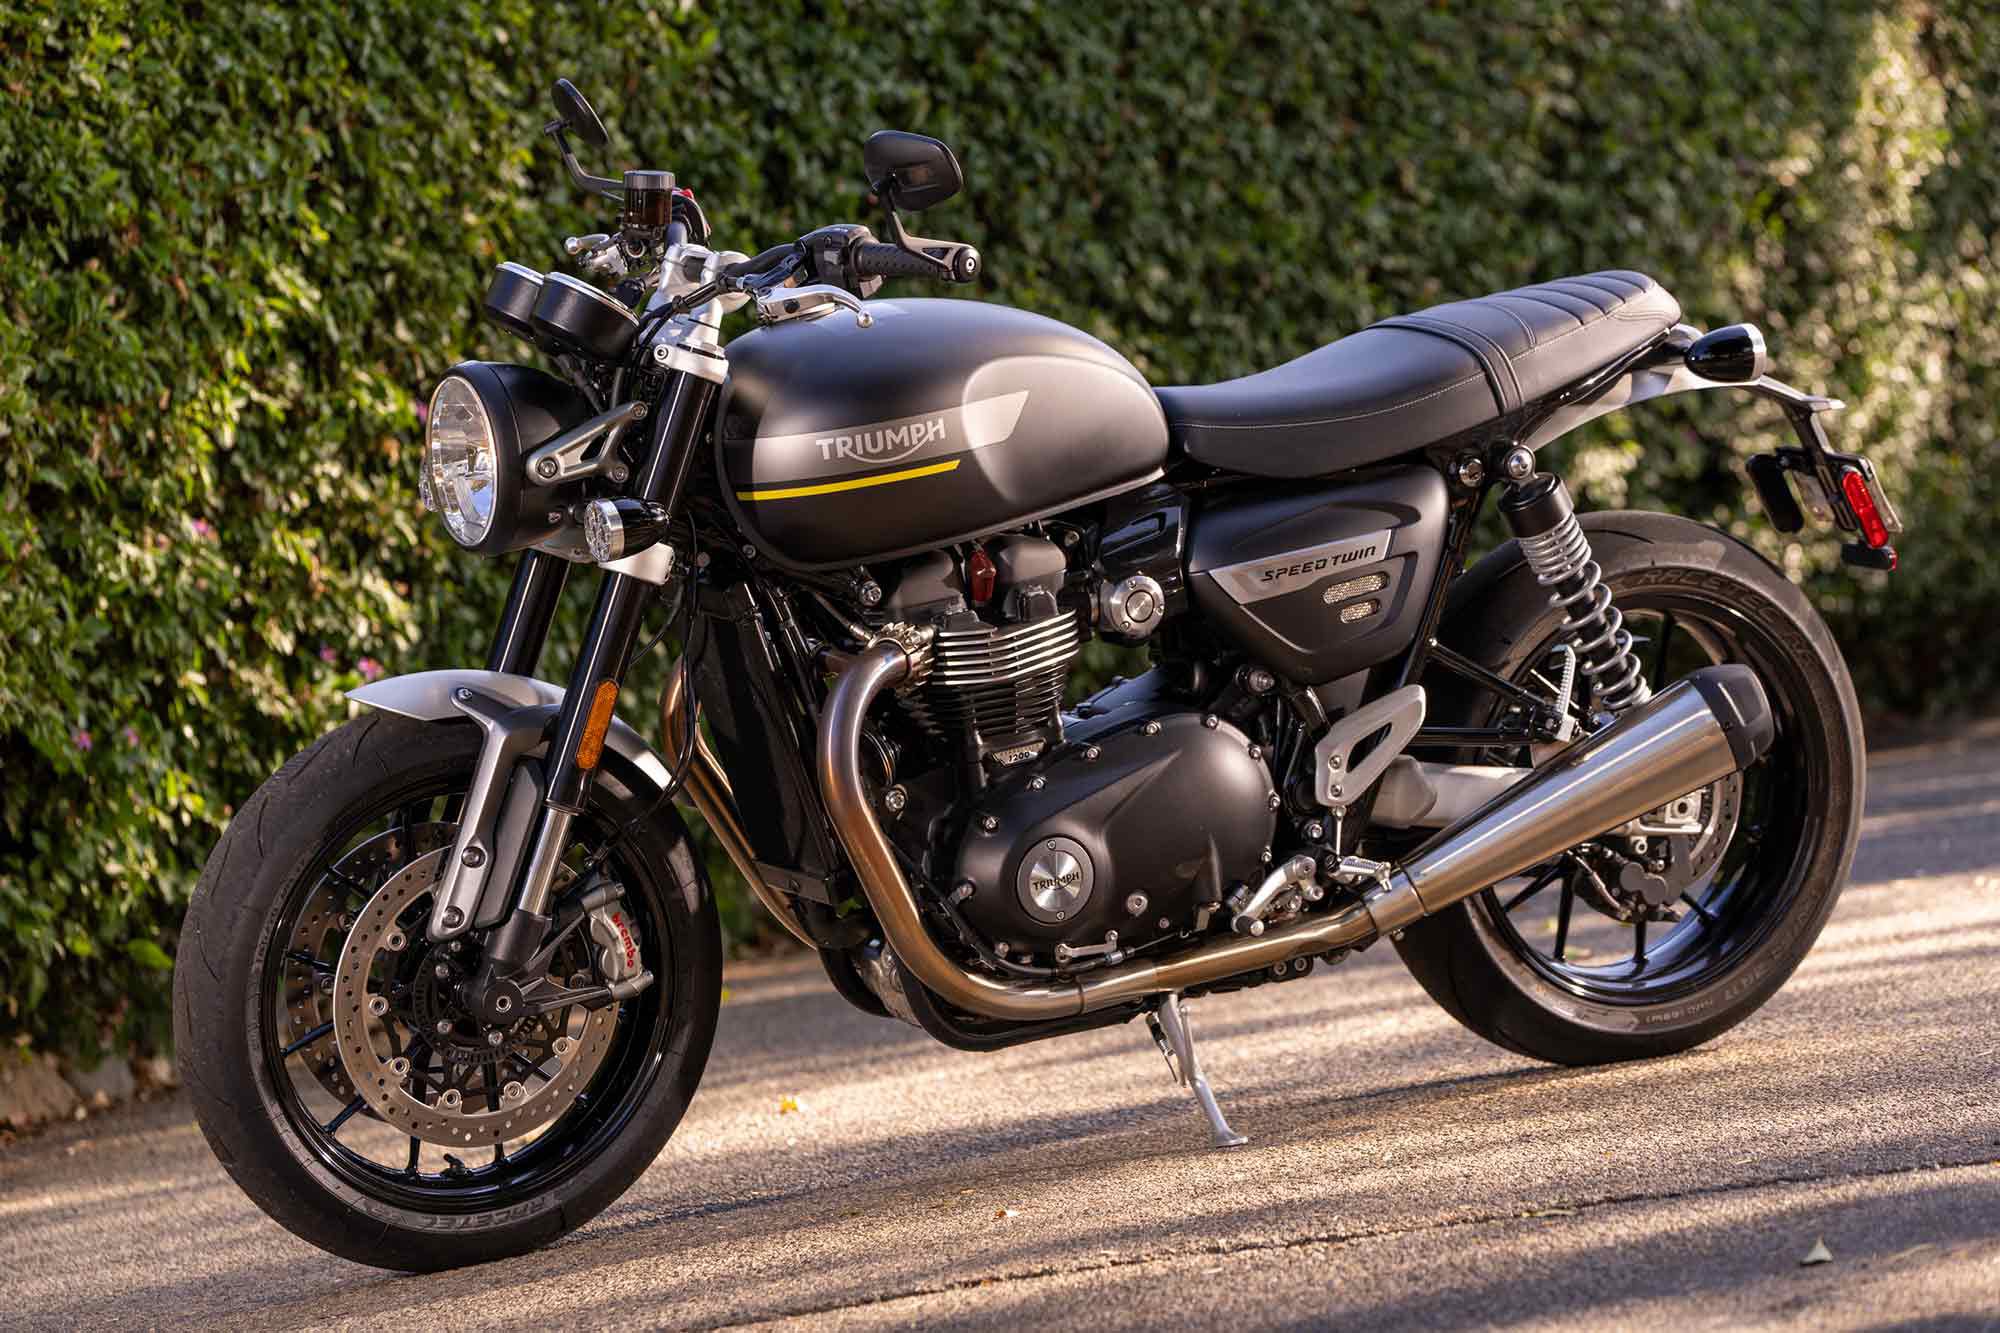 With a couple of fixes (suspension adjustment and an LED headlamp), Triumph would have a modern classic home run with its Speed Twin.